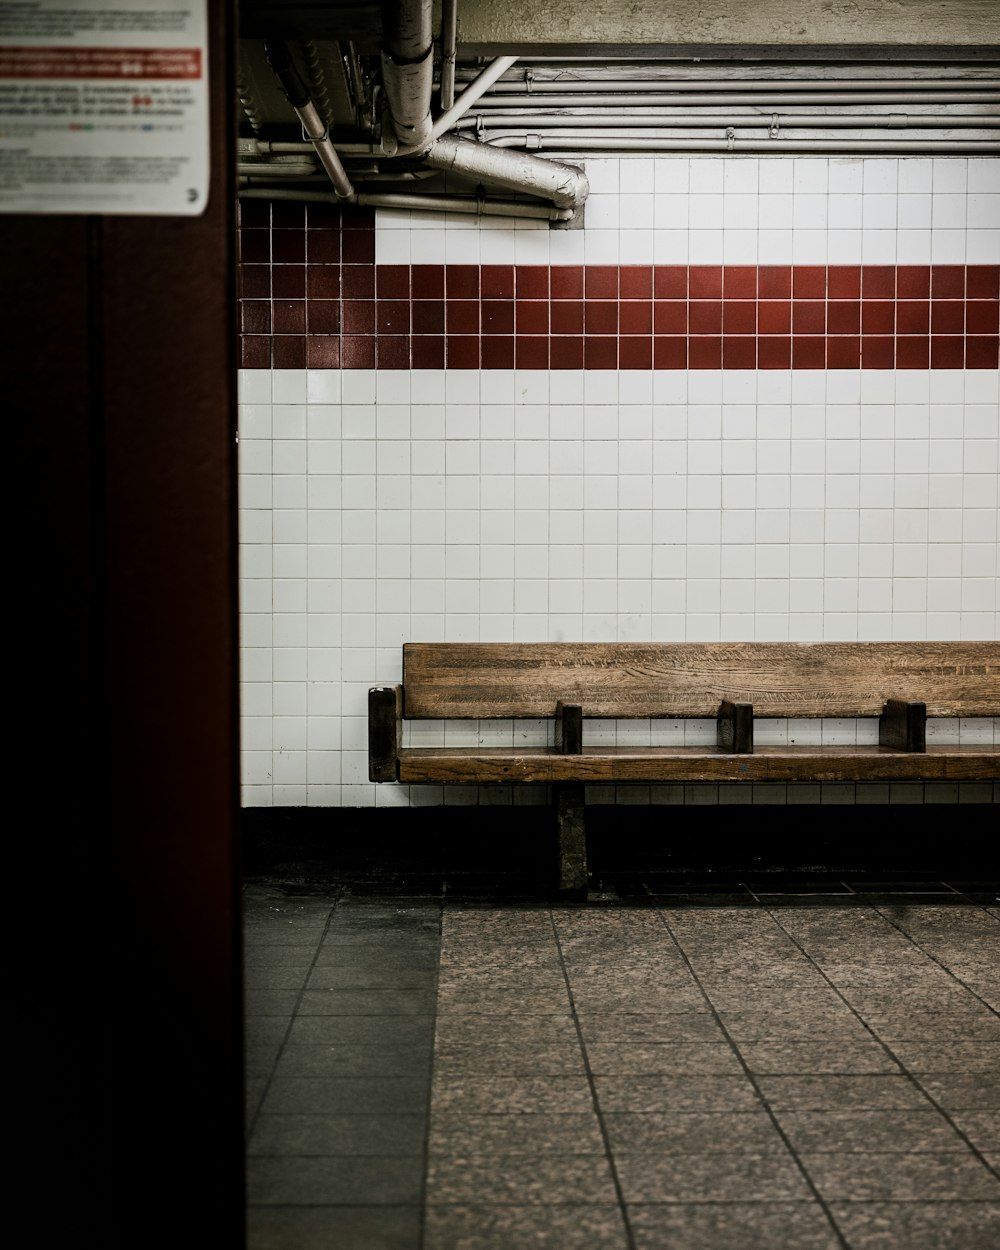 a wooden bench sitting in a subway station